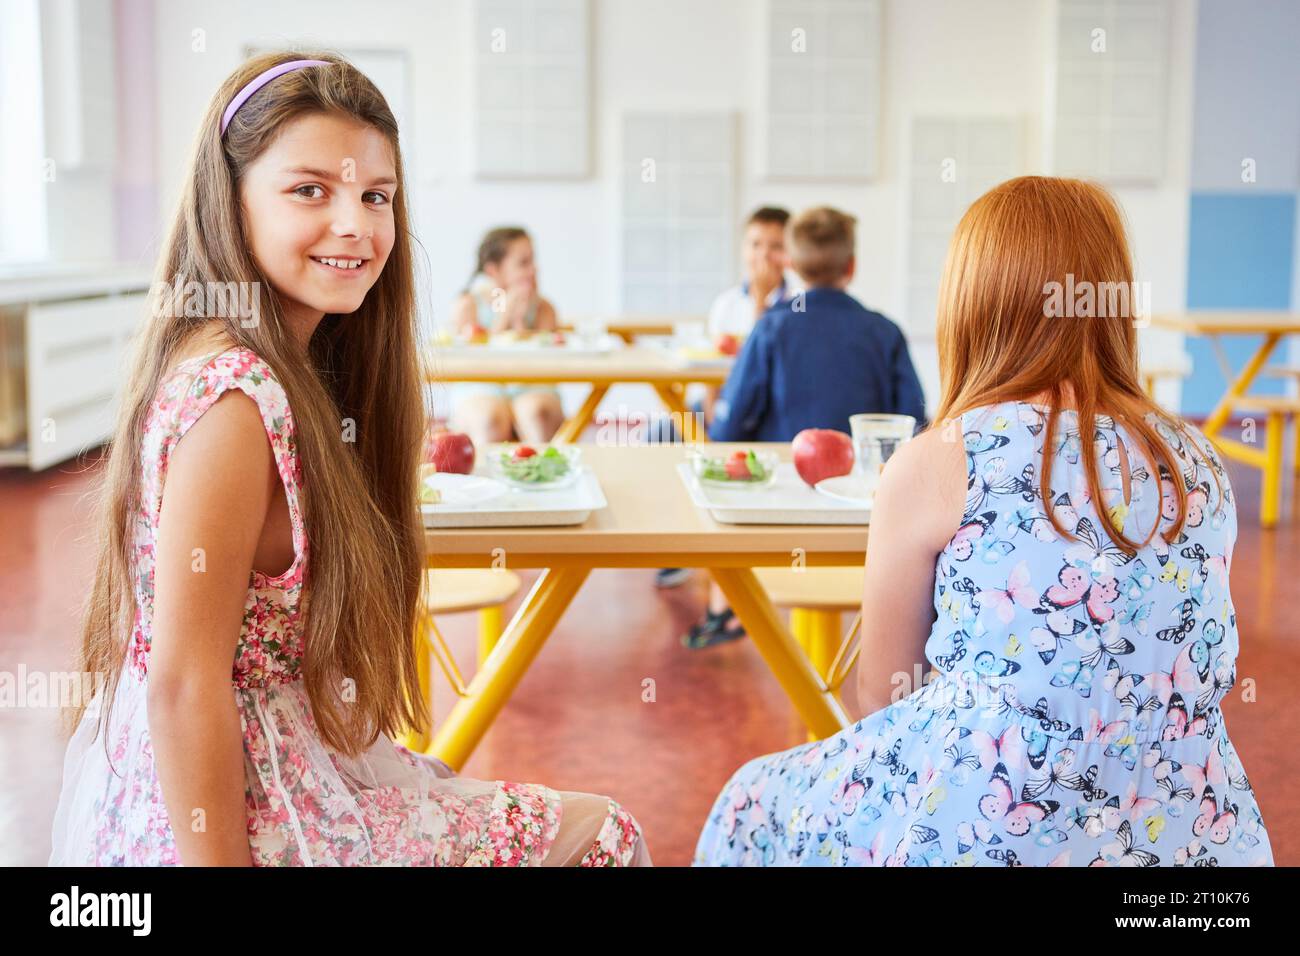 Portrait of smiling girl sitting with female friend in cafeteria at school Stock Photo